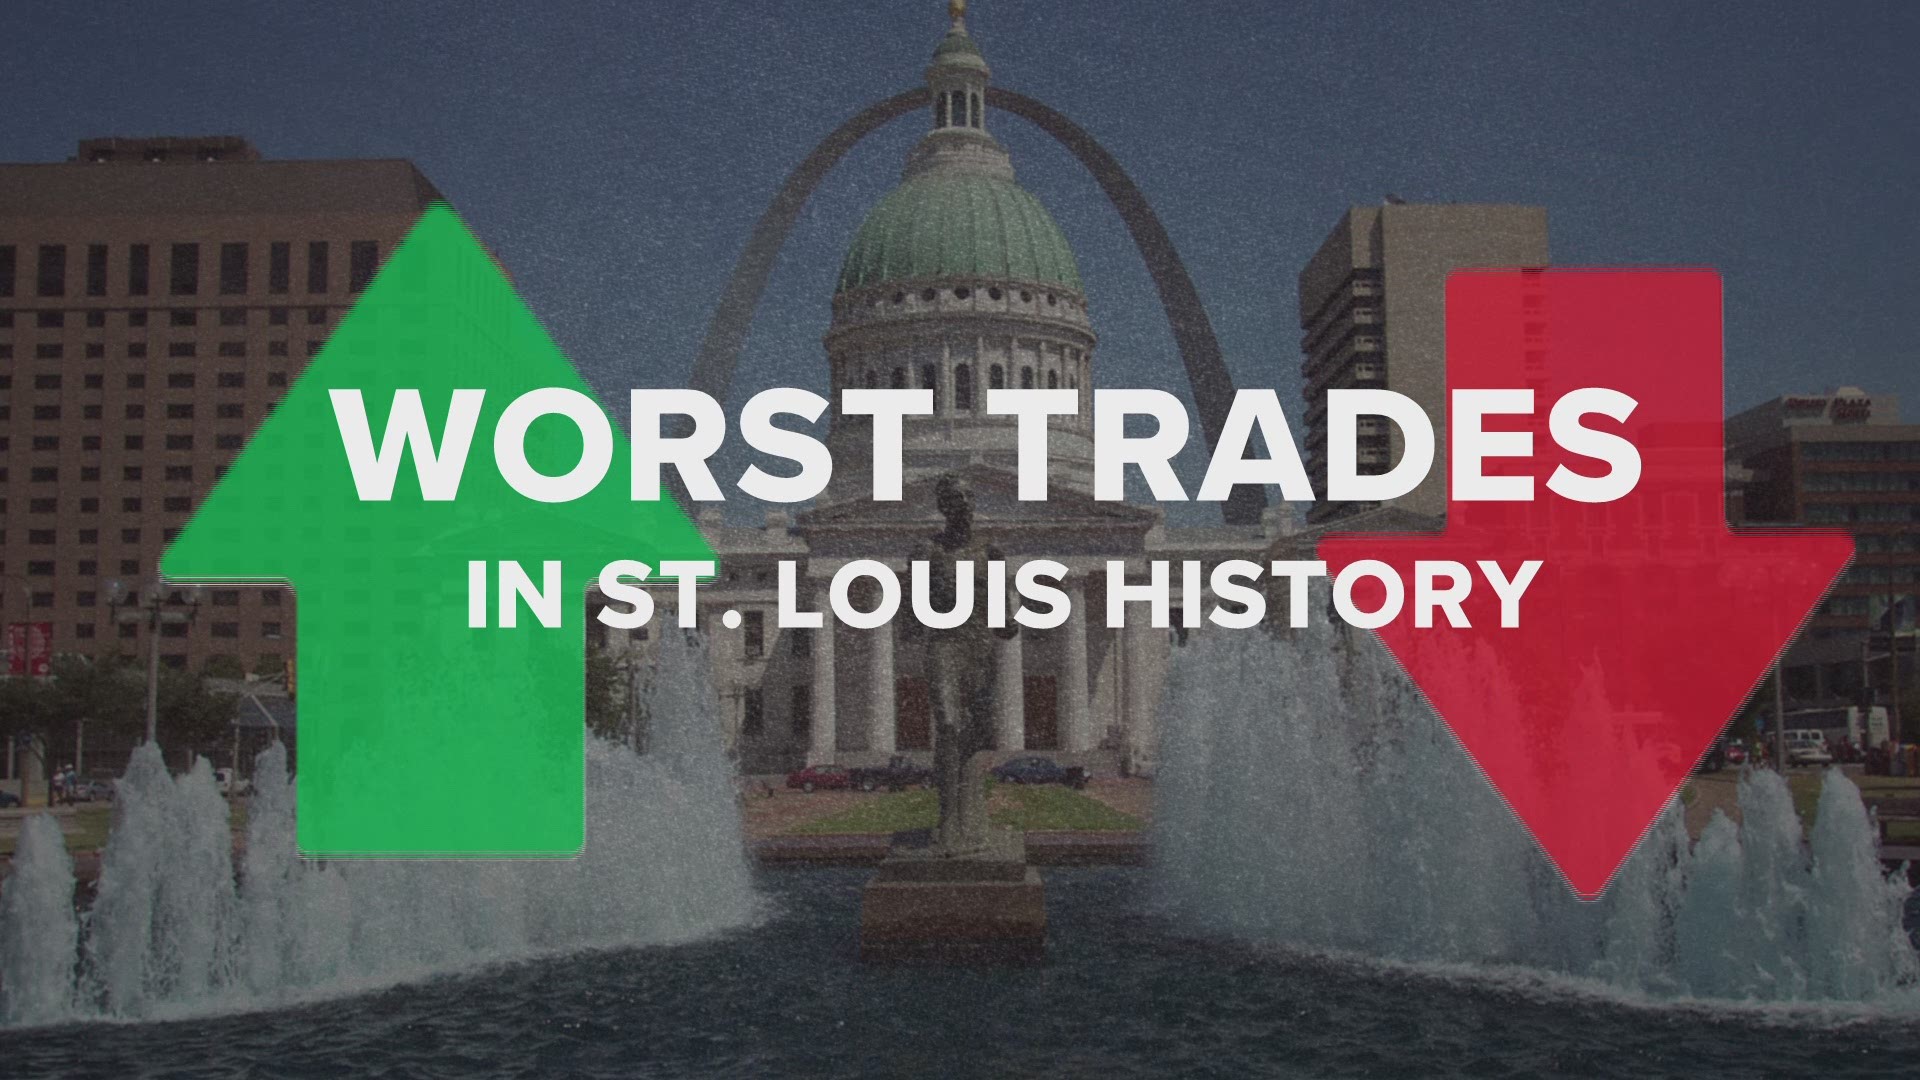 St. Louis sports teams have made a lot of great trades over the years... and some bad ones, too. Here's a look at the 10 worst trades made by St. Louis sports teams.